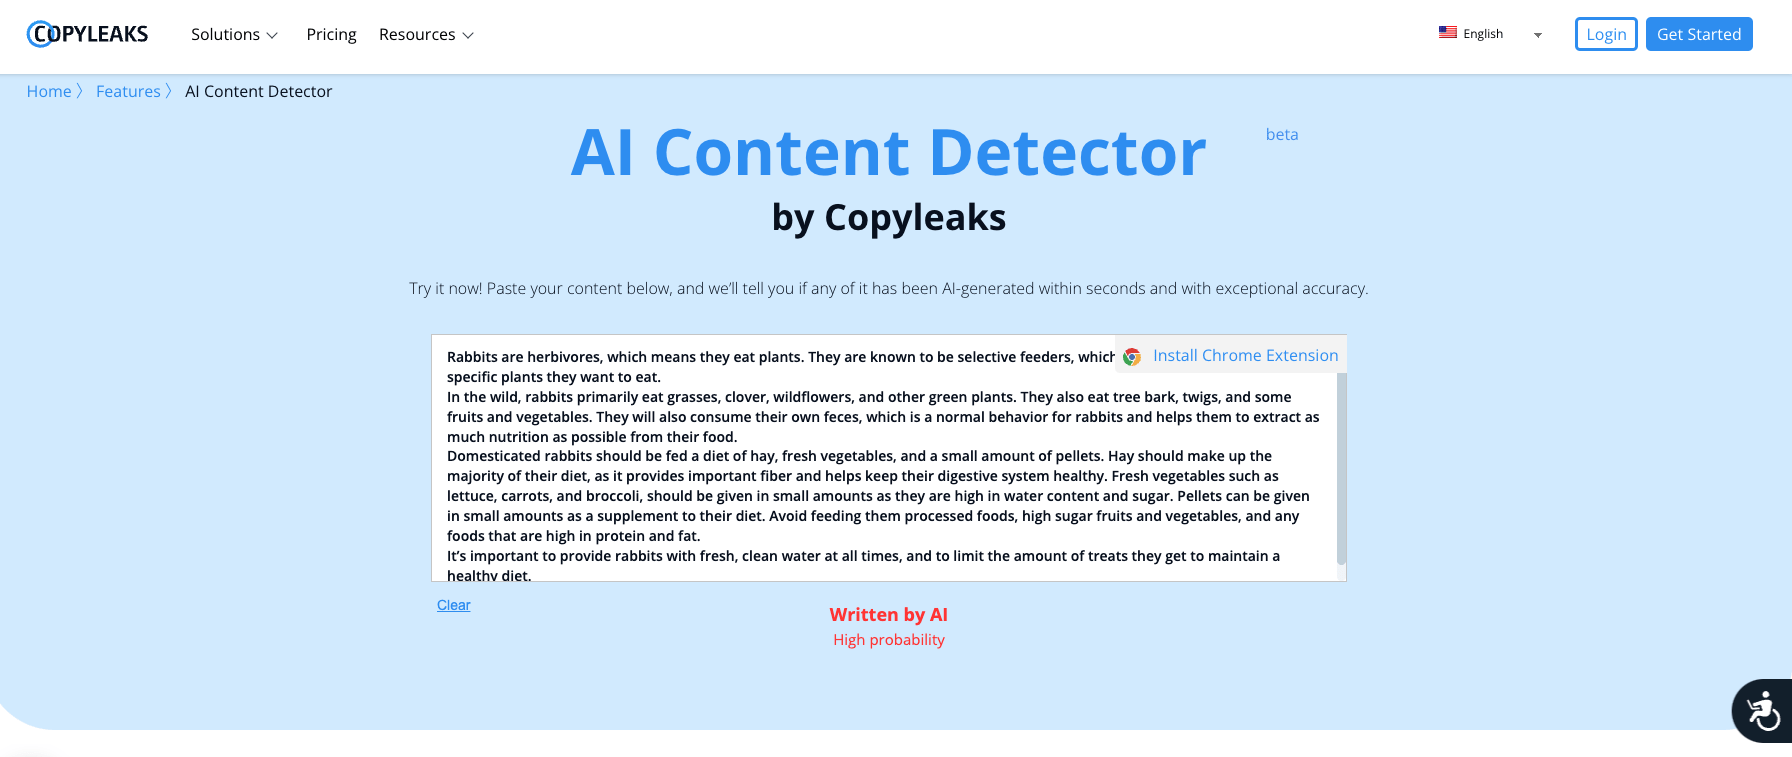 Copyleaks Review 2023: Is It Accurate and Legit? - EduReviewer